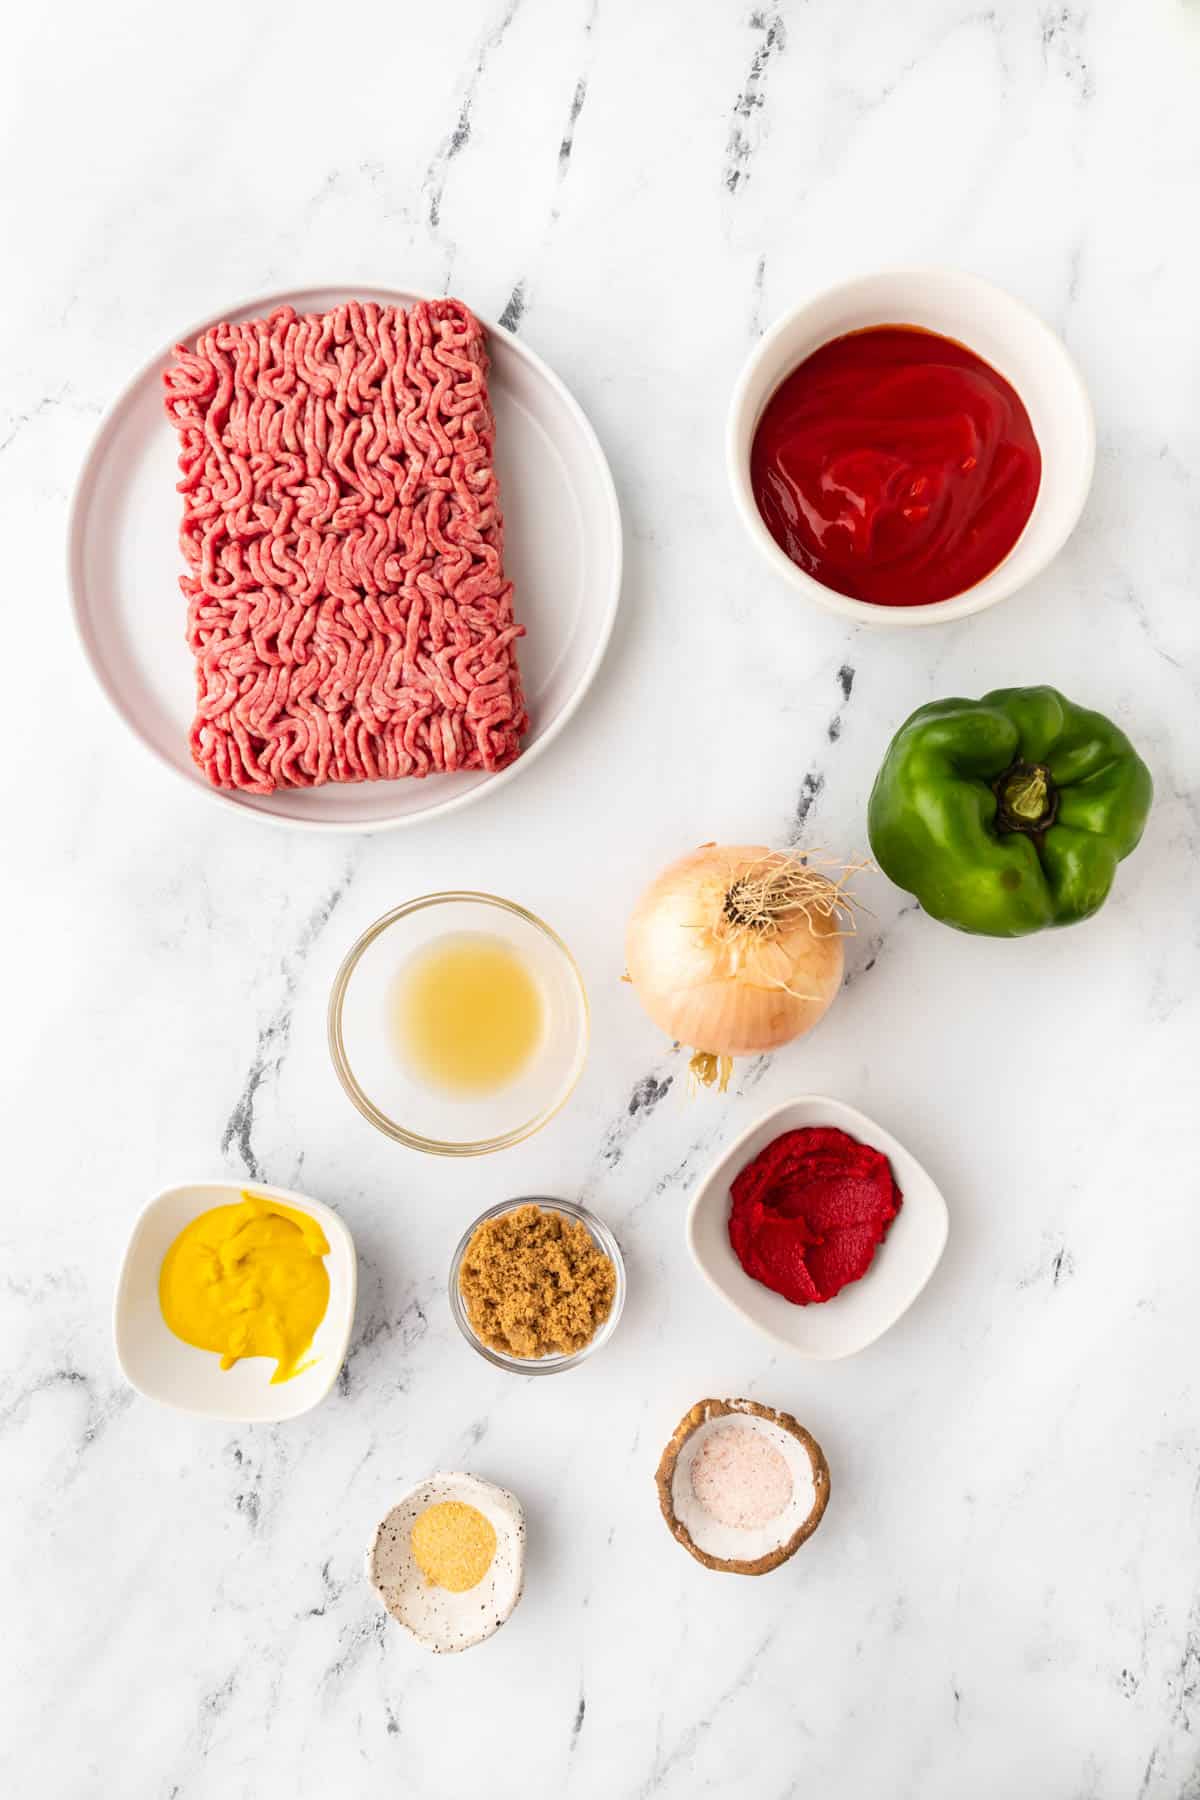 Ground beef, tomato sauce, green bell peper, onion, mustard, paprika and other spices to prepare homemade Sloppy Joes are displayed in individual bowls on a white surface. 